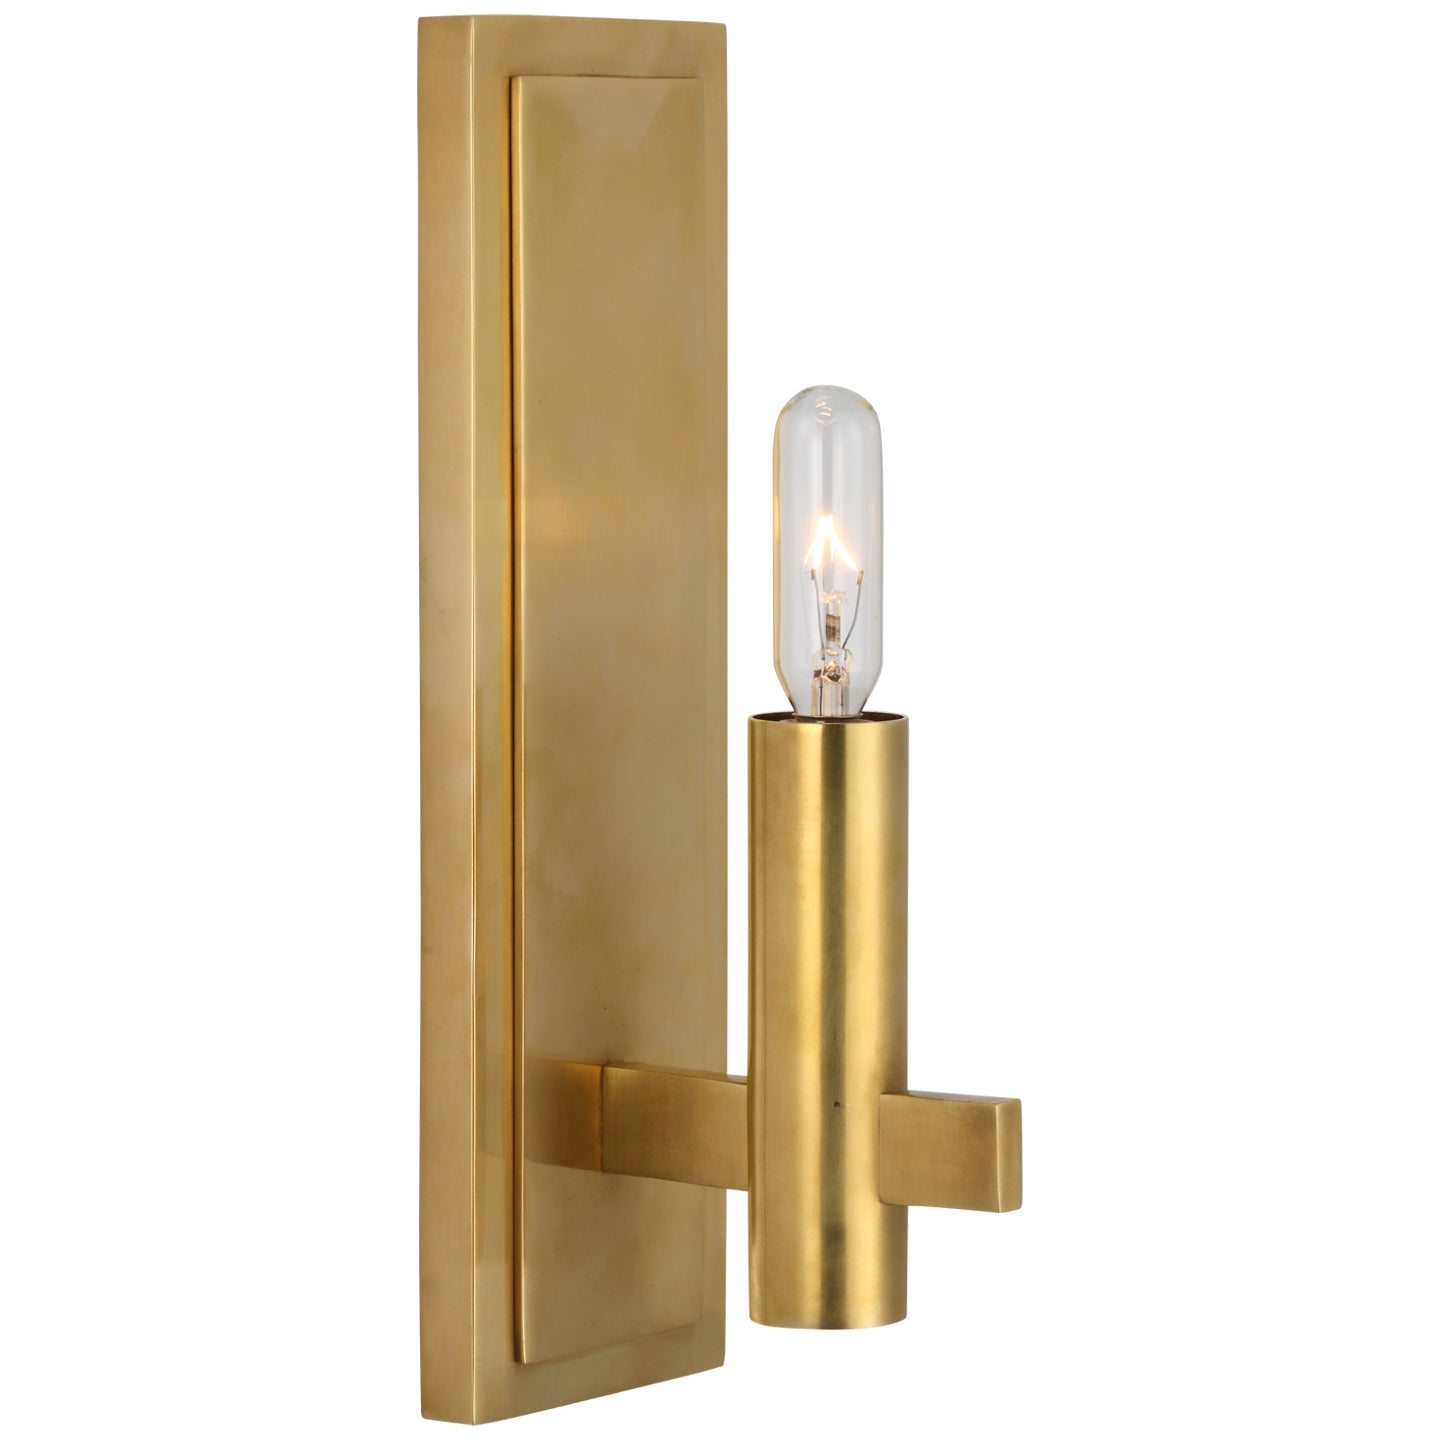 Visual Comfort Signature - CHD 2630AB - LED Wall Sconce - Sonnet - Antique-Burnished Brass